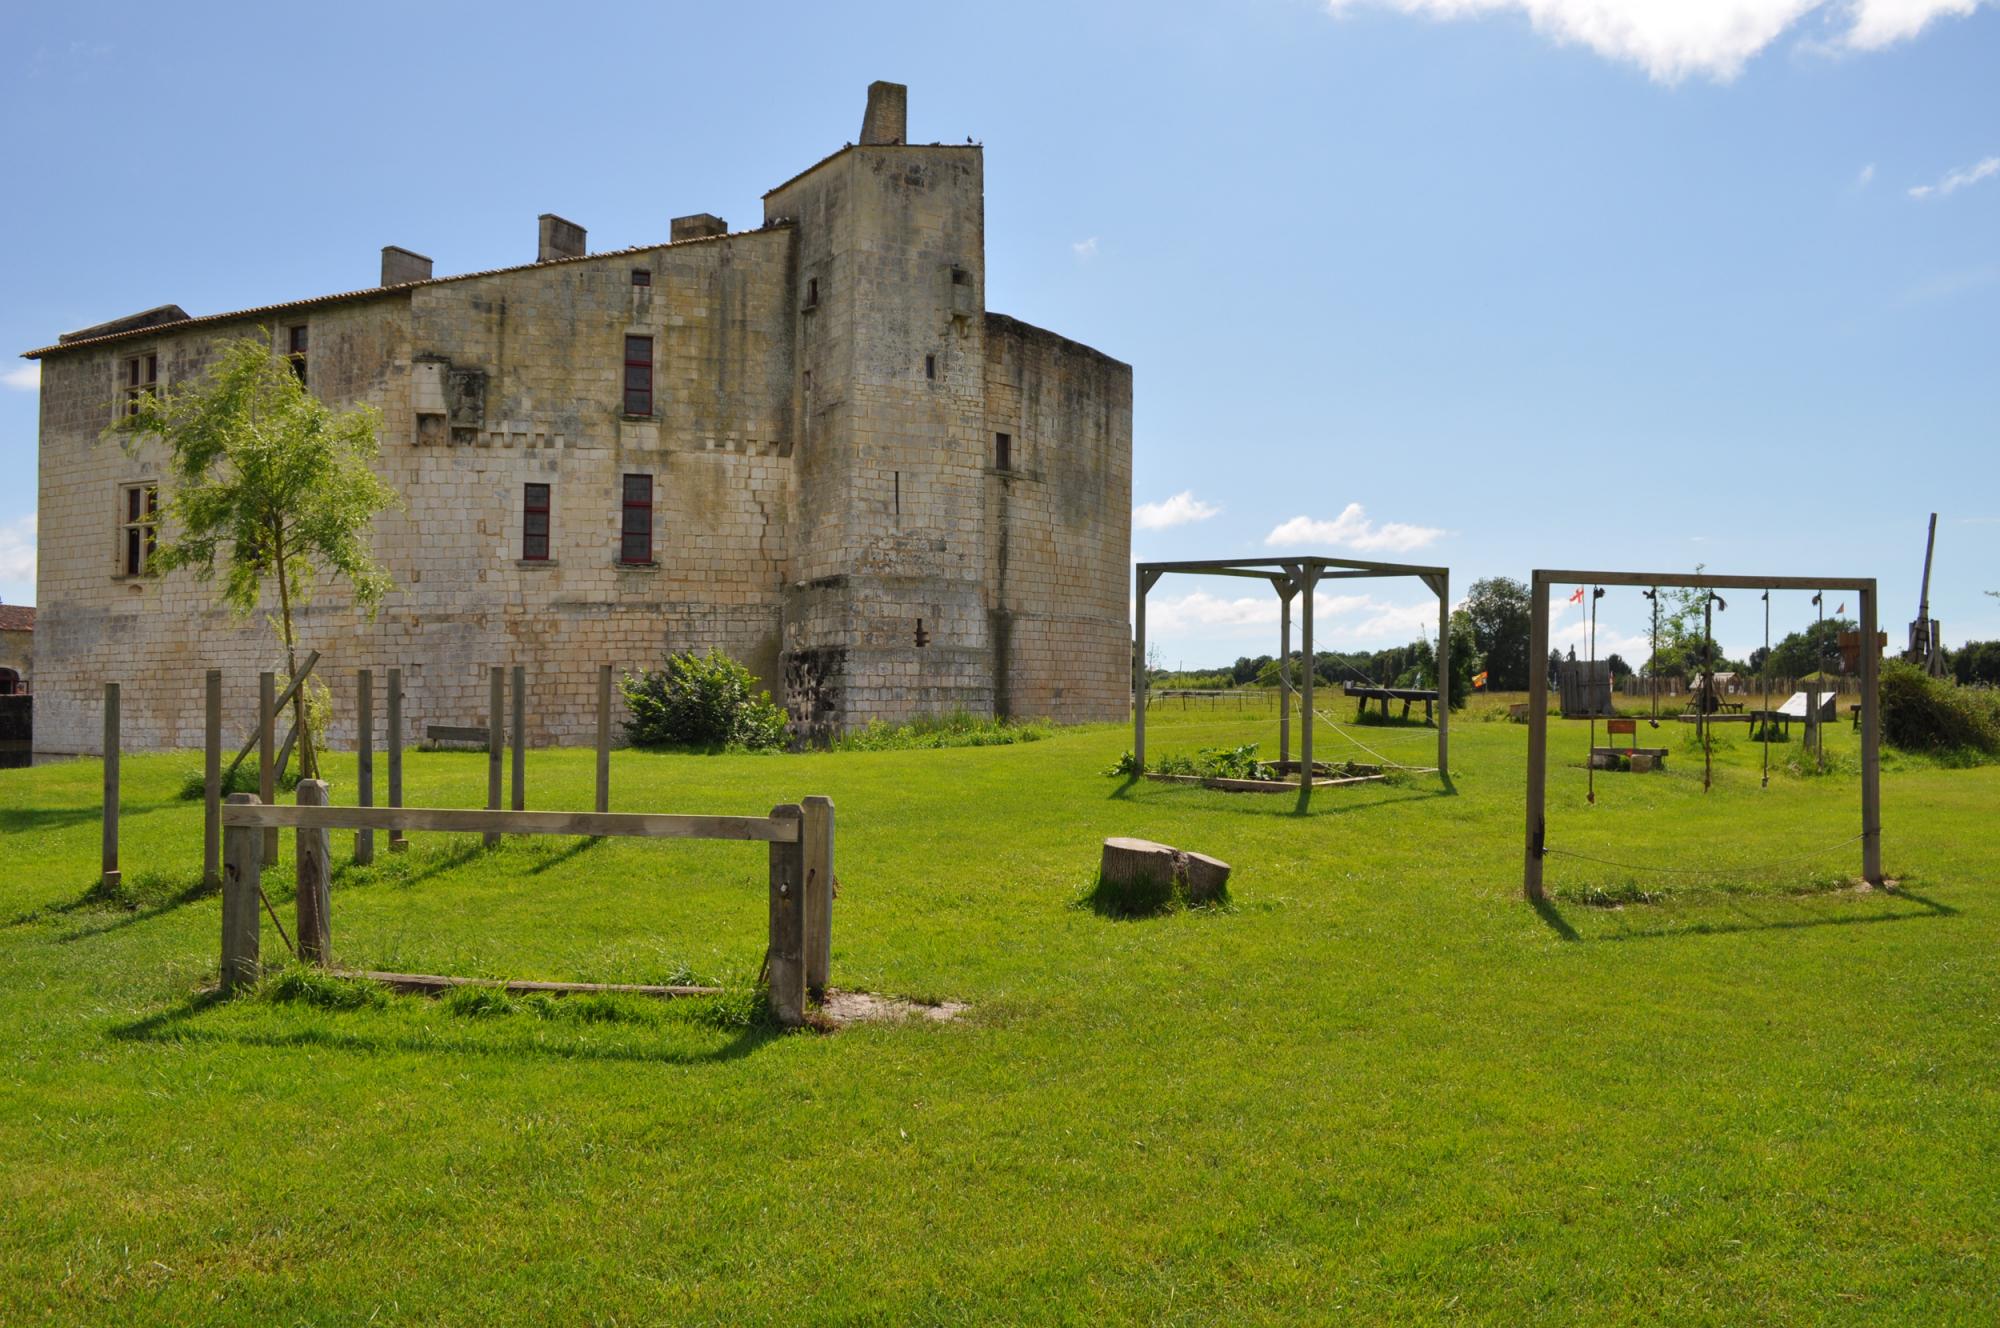 Medieval games for the whole family - Fortified castle and medieval theme park in Charente Maritime